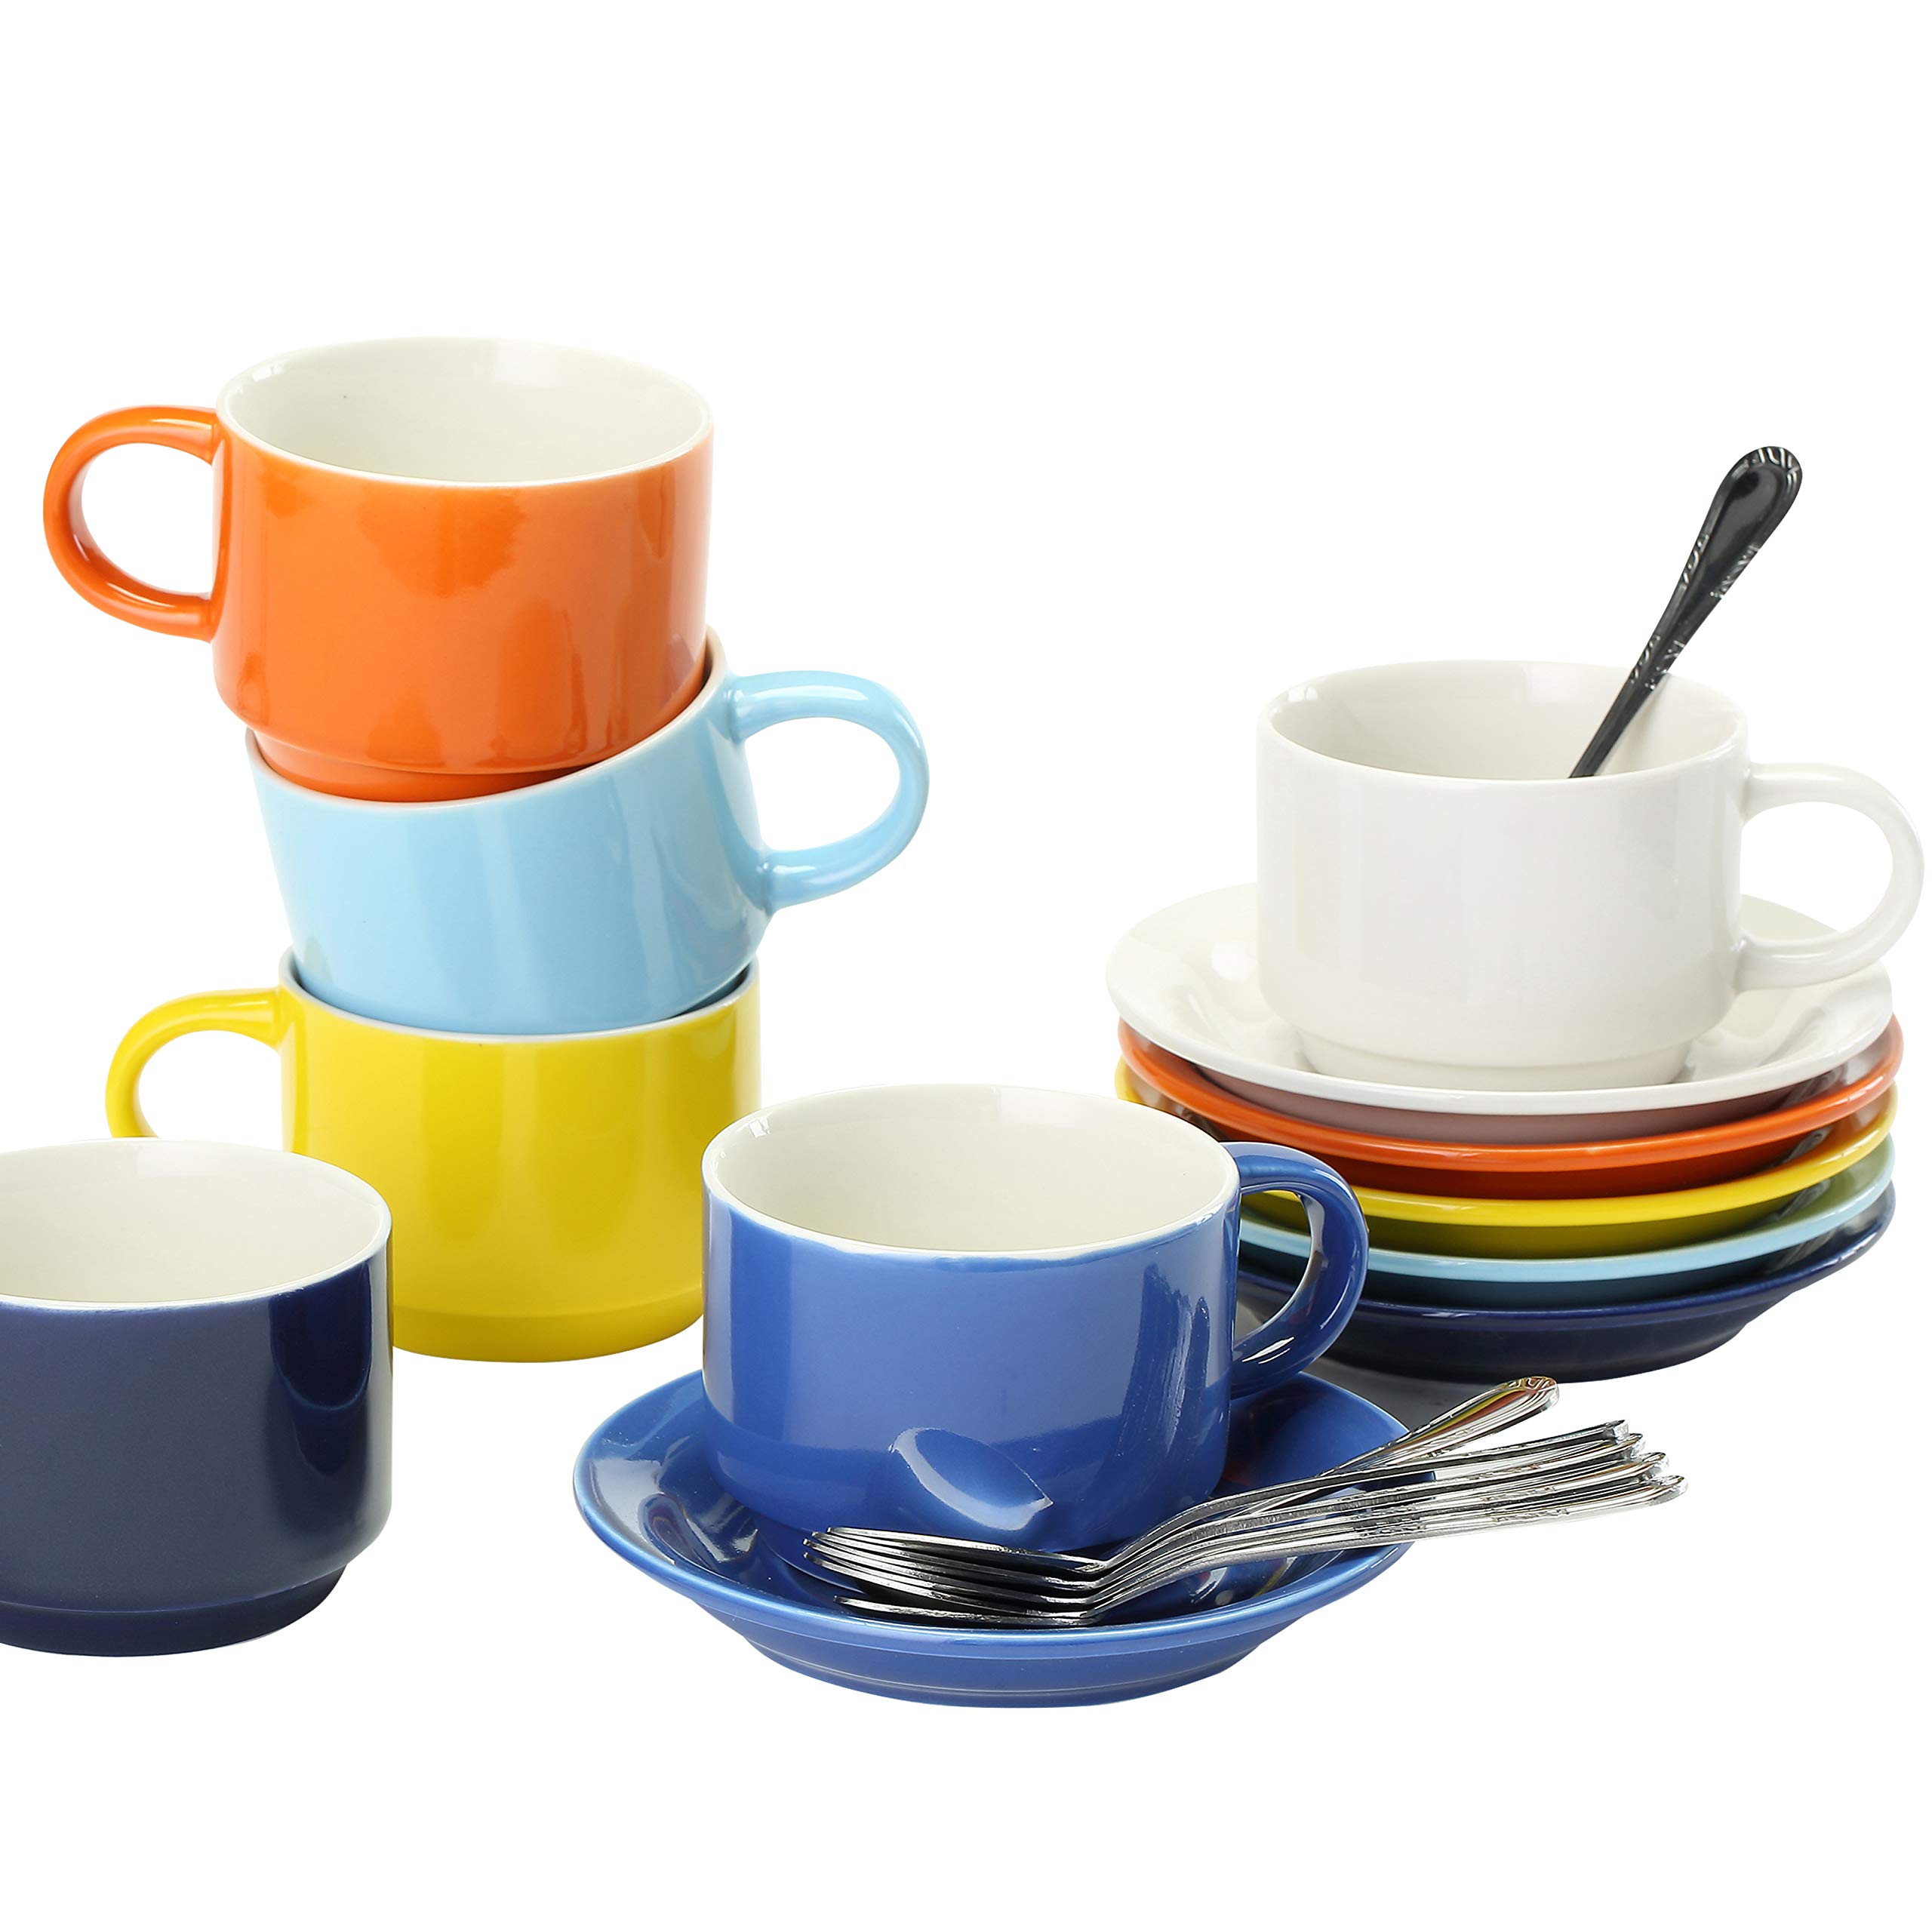 JULKYA SET OF 6 STACKABLE 4OZ MULTICOLORED PORCELAIN ESPRESSO CUPS WITH SAUCERS AND METAL STAND +BONUS STAINLESS STEEL SPOONS - LIGHTWEIGHT CUPS FOR ESPRESSO, LATTE, CAFÉ MACCHIATO, OR TEA, DEMITASSE